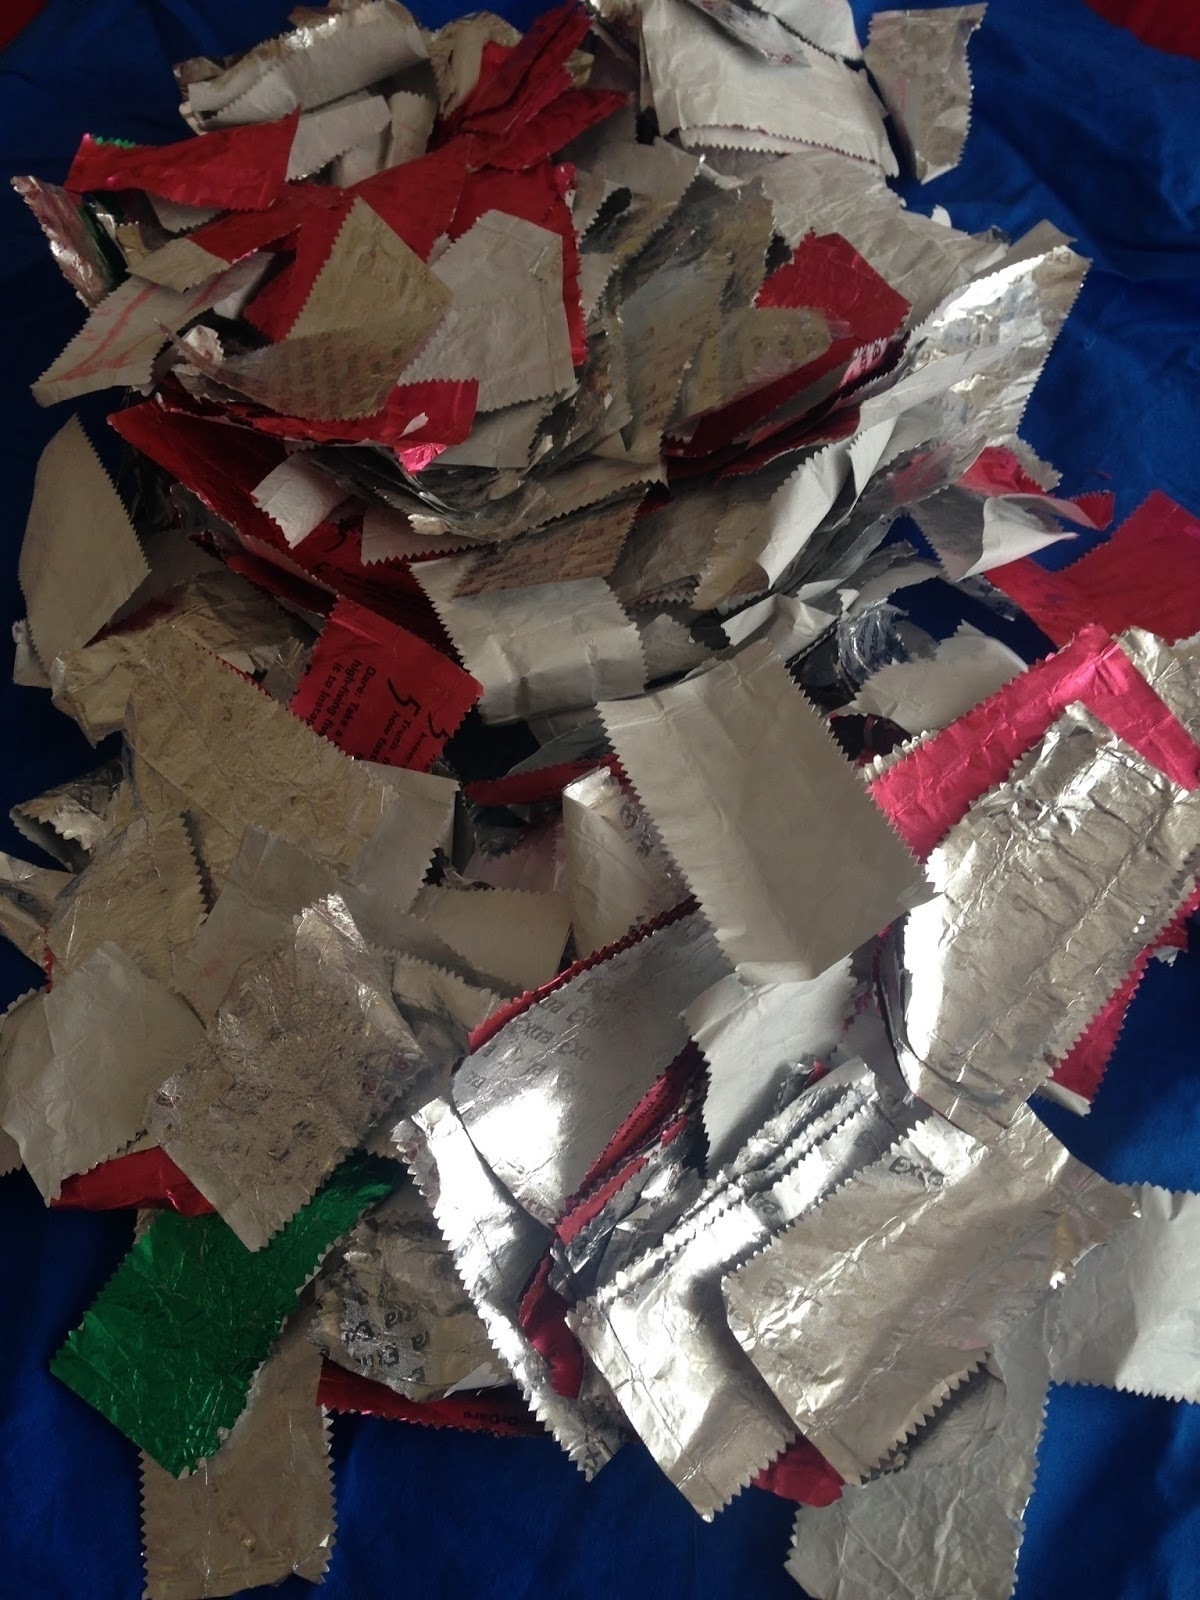 A pile of gum wrappers